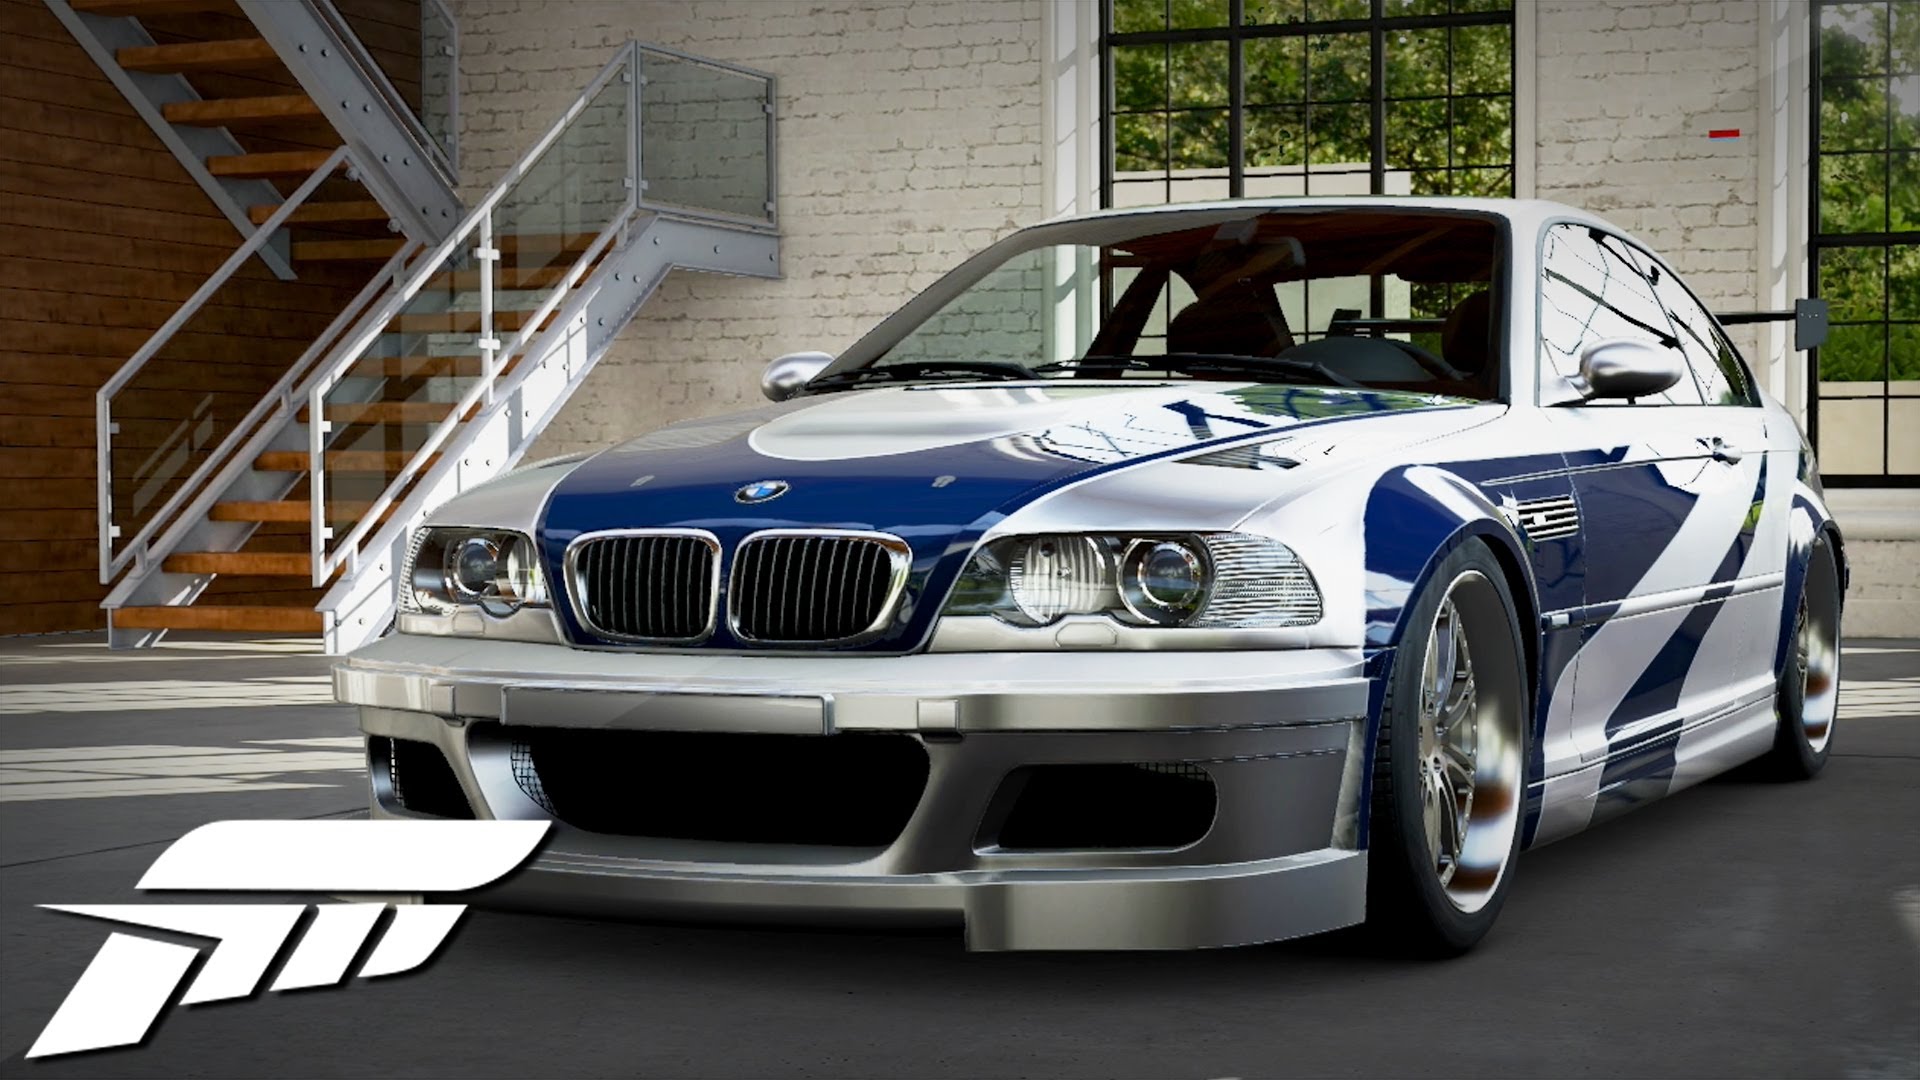 Free Download Bmw M3 Gtr Hd Wallpaper Full Hd Pictures 1920x1080 For Your Desktop Mobile Tablet Explore 98 Bmw E46 M3 Gtr Wallpapers Bmw E46 M3 Gtr Wallpapers Bmw - bmw m3 gtr from nfsmw on roblox d youtube